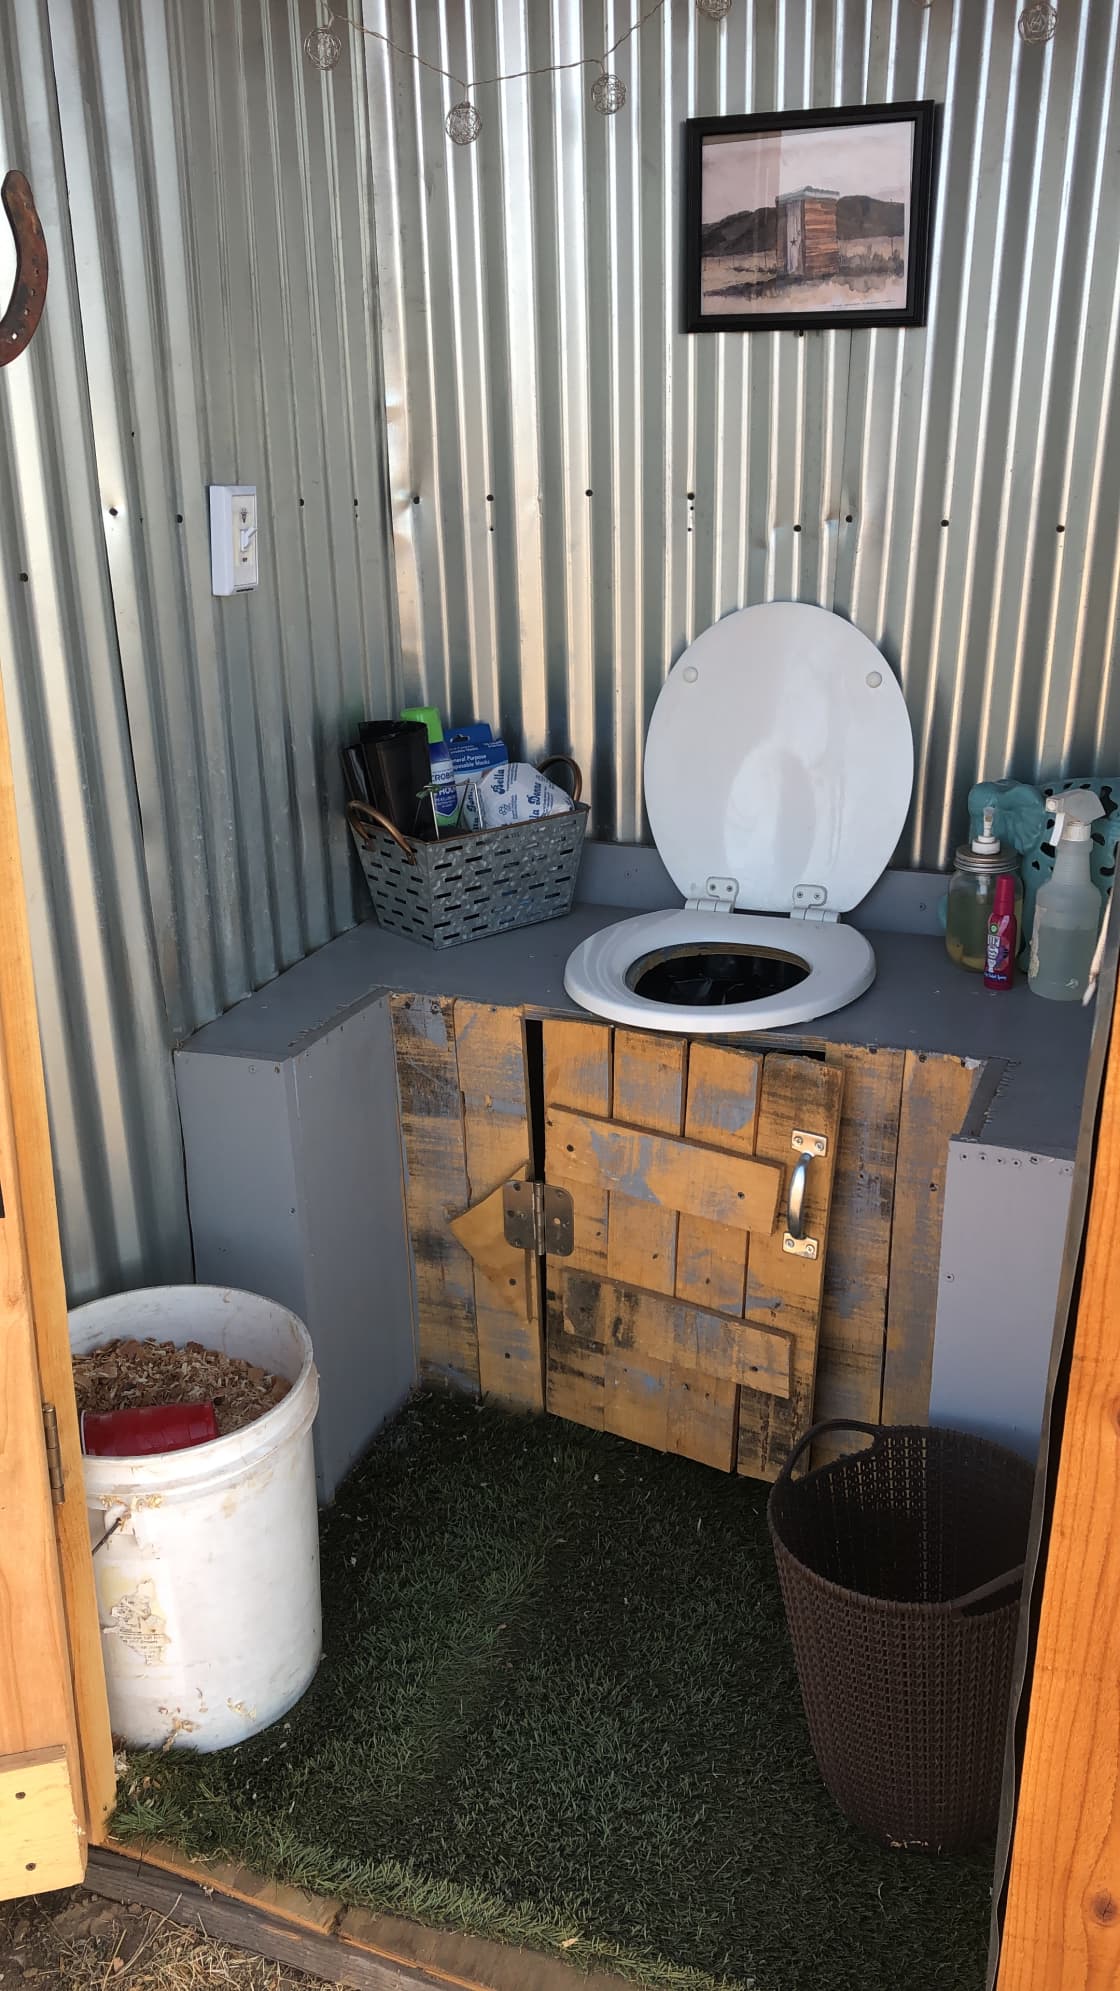 Outhouse - clean & tidy non-flushable toilet